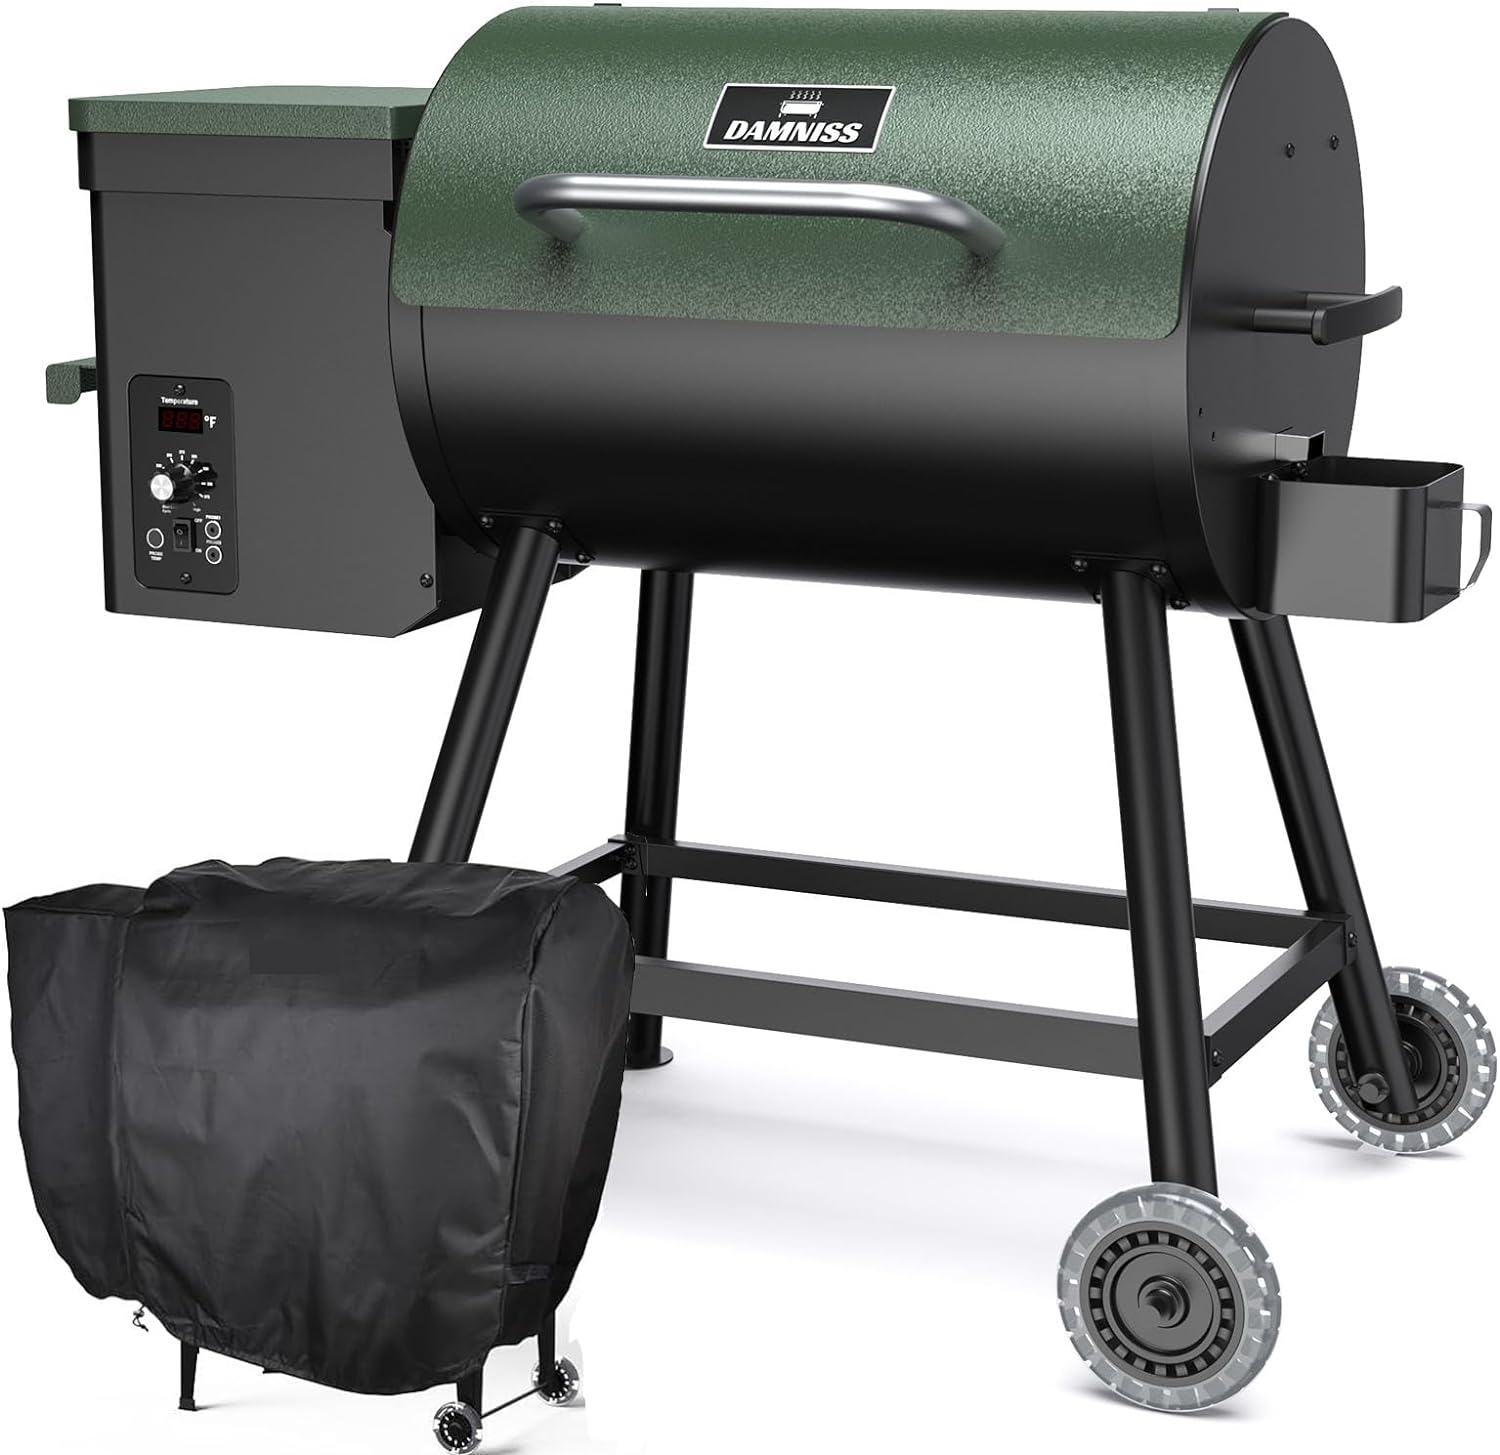 Wood Pellet Grill  Smoker 8-in-1 Pellet Grill with Automatic Temperature Control,  Rain Cover 456 Sq in Area for Backyard Camping Outdoor